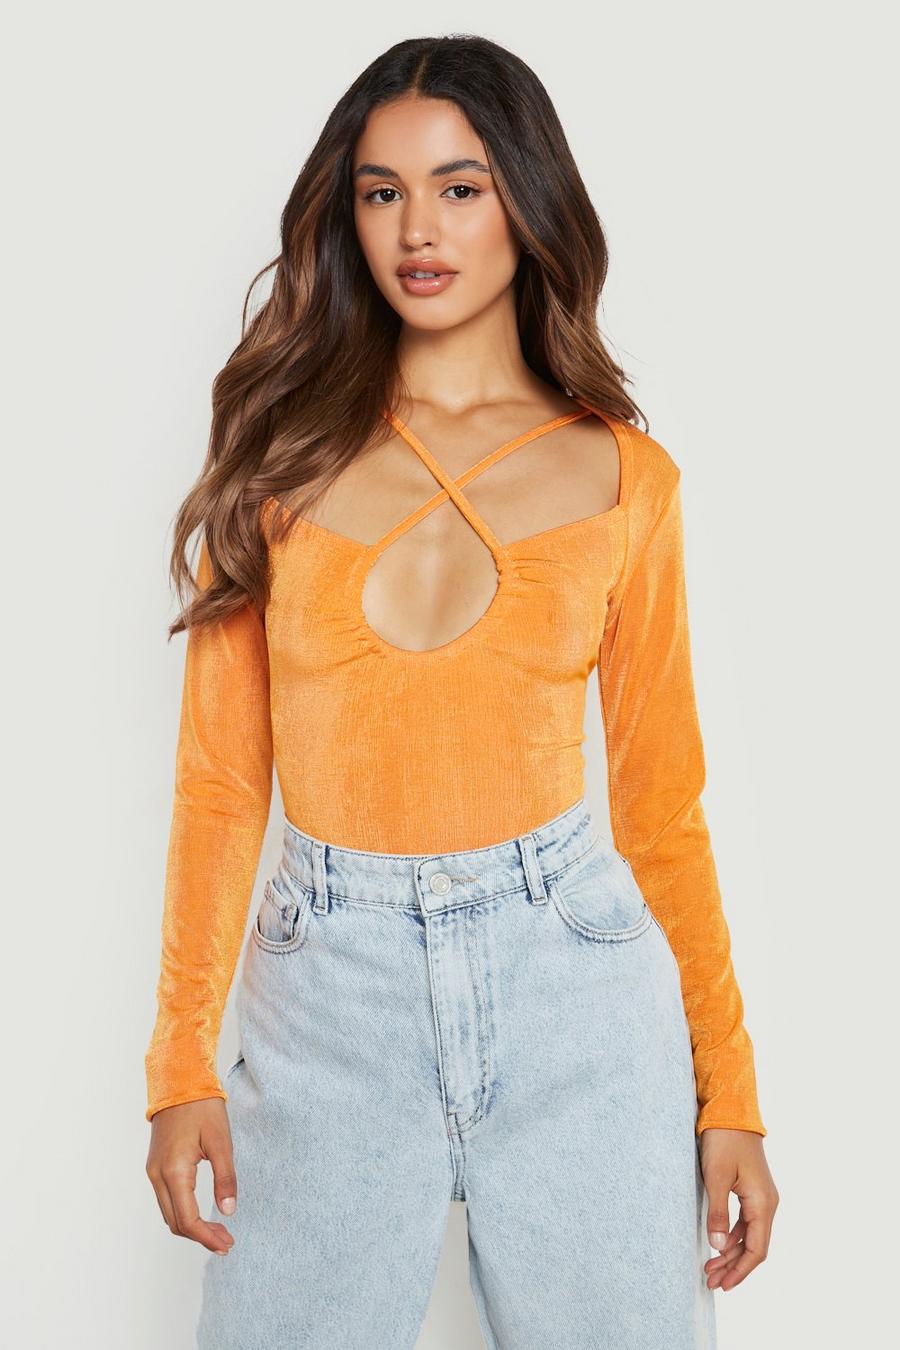 Tangerine Body med cut-out